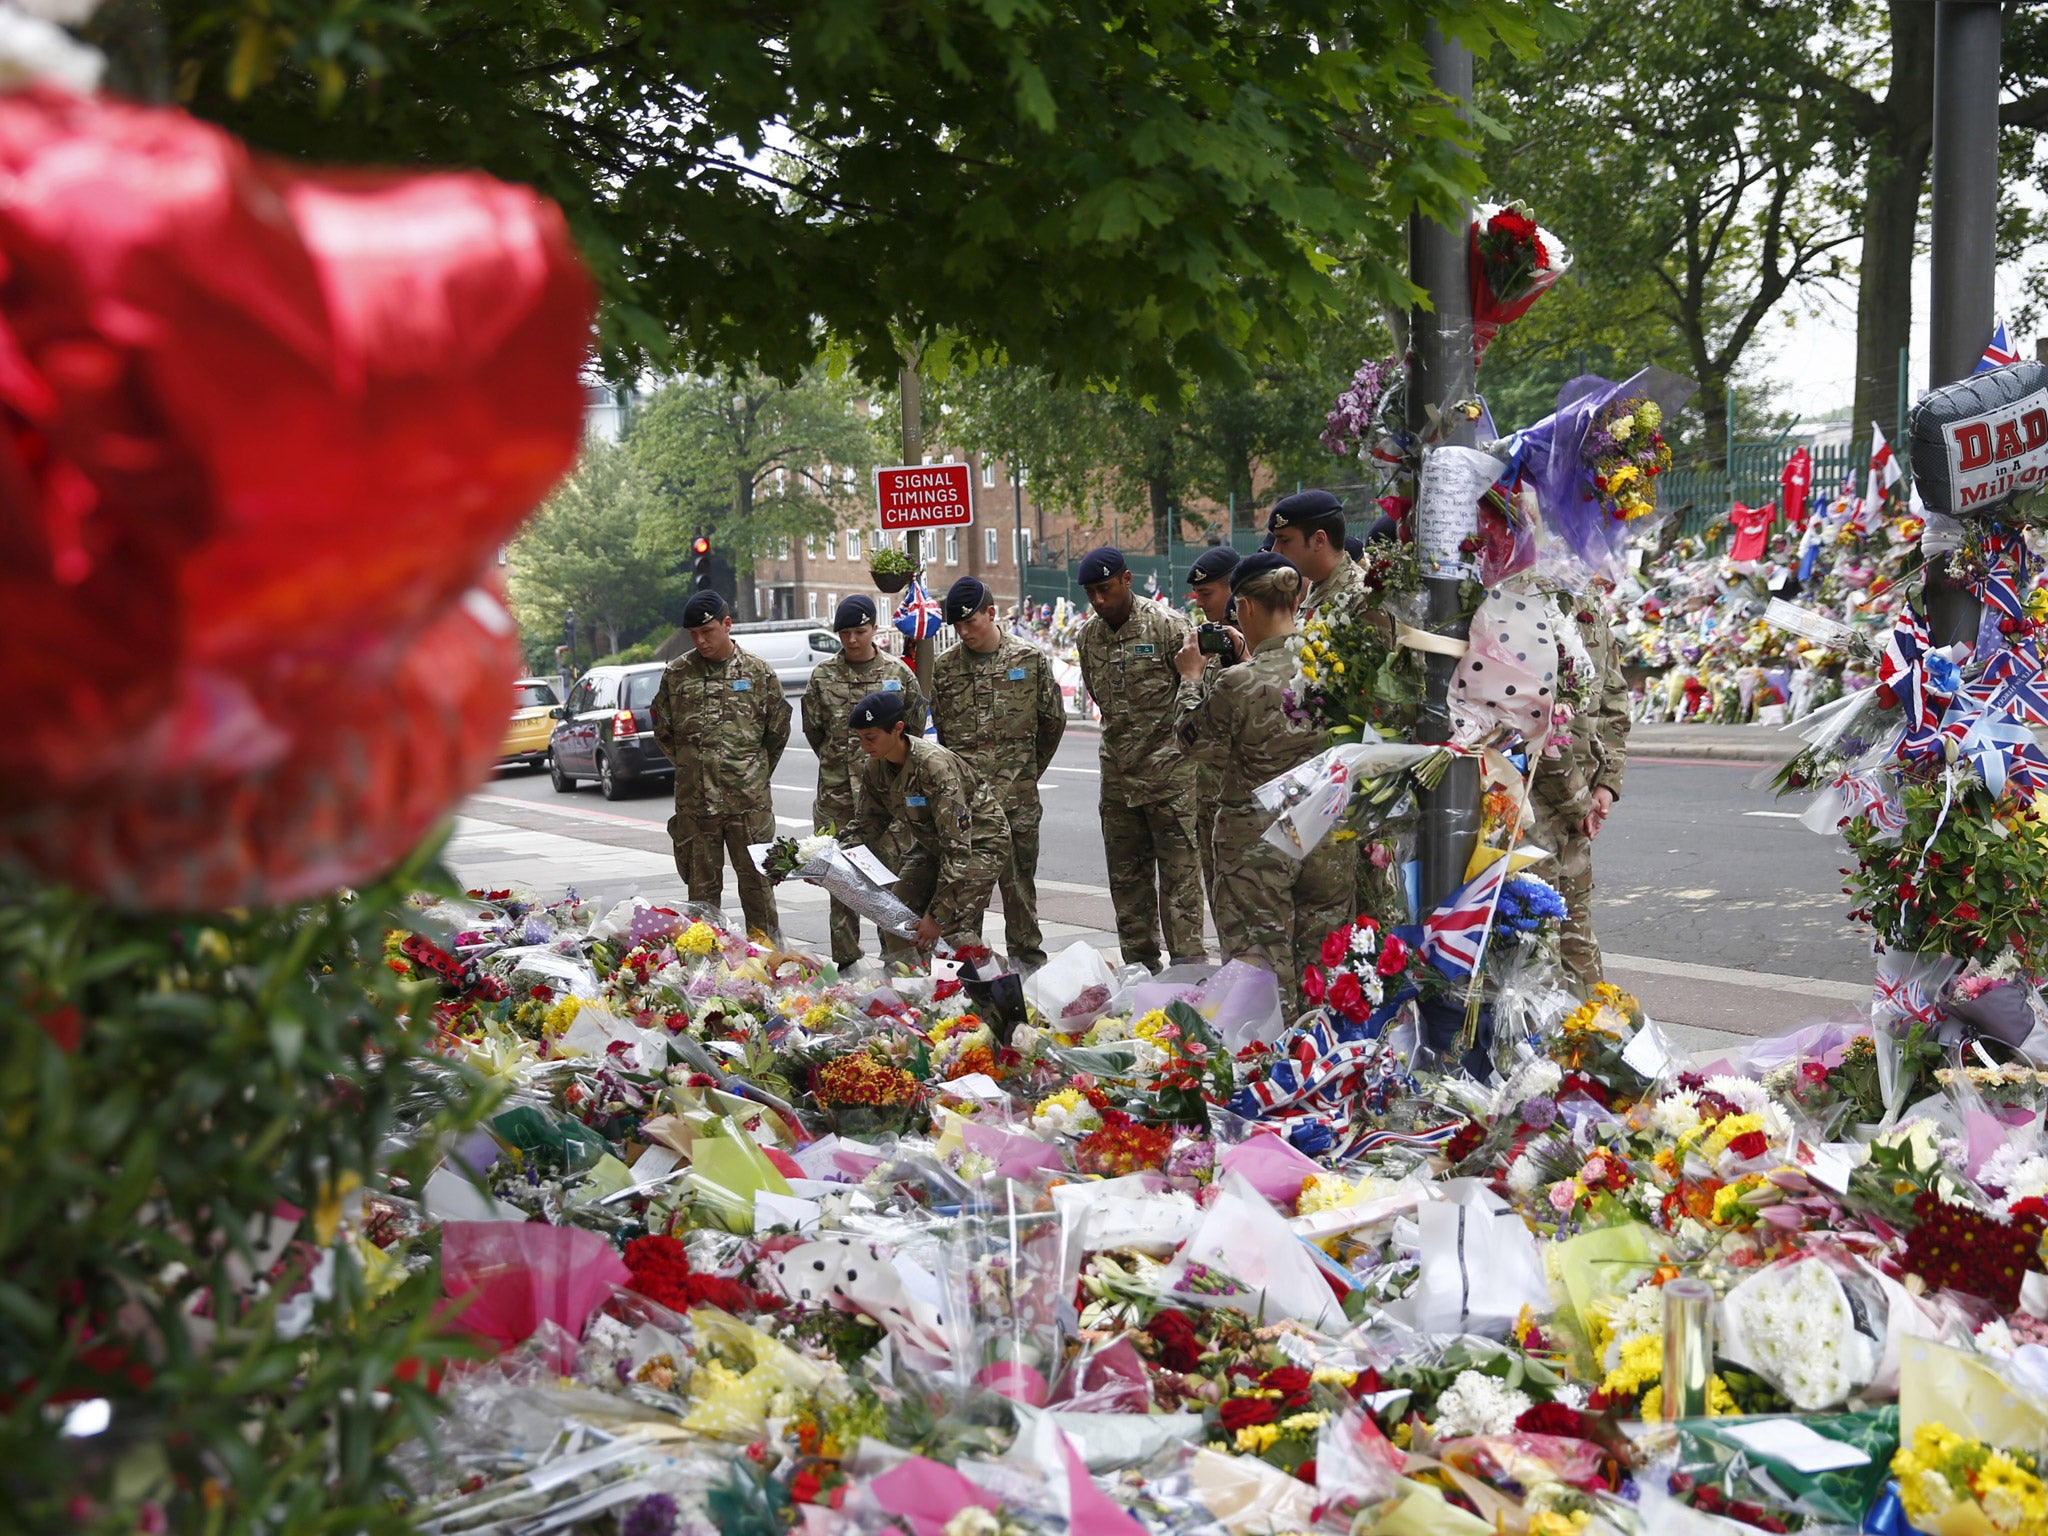 31 May 2013: Soldiers lay flowers at the scene of the killing of British soldier Lee Rigby in Woolwich, southeast London. The inquest into Rigby's death was opened and adjourned.